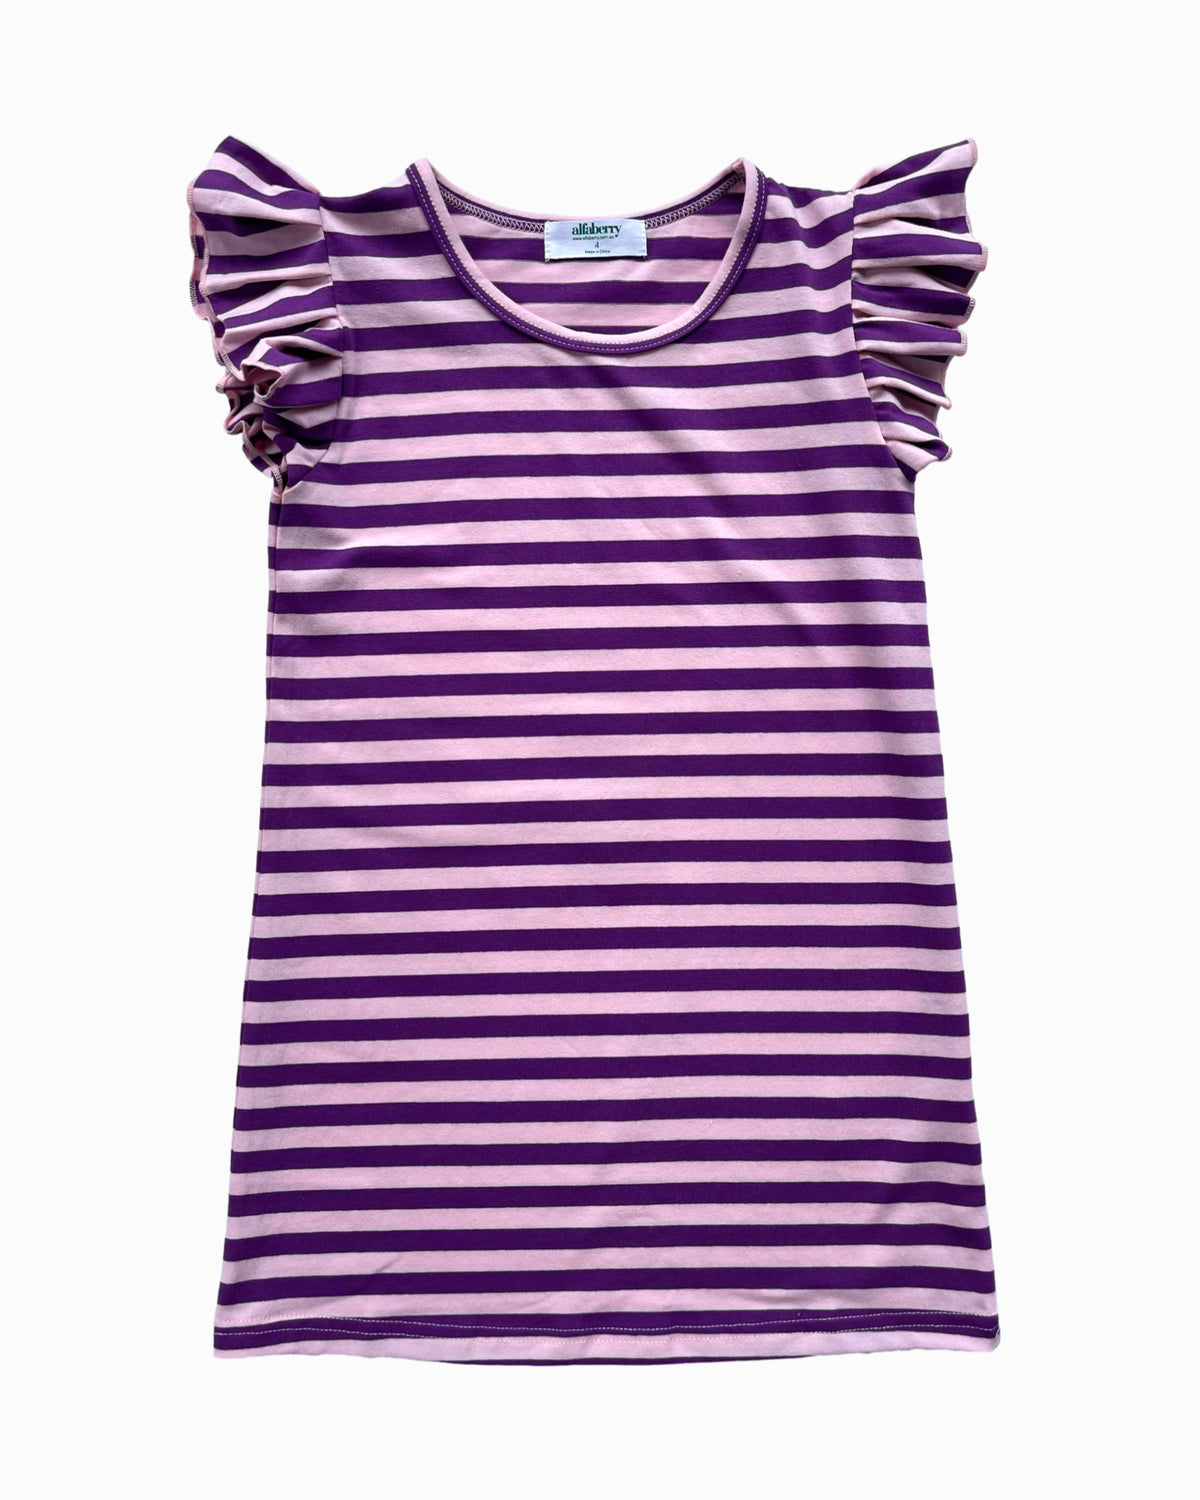 Flutter T-Shirt Dress in Purple and Pink Stripes